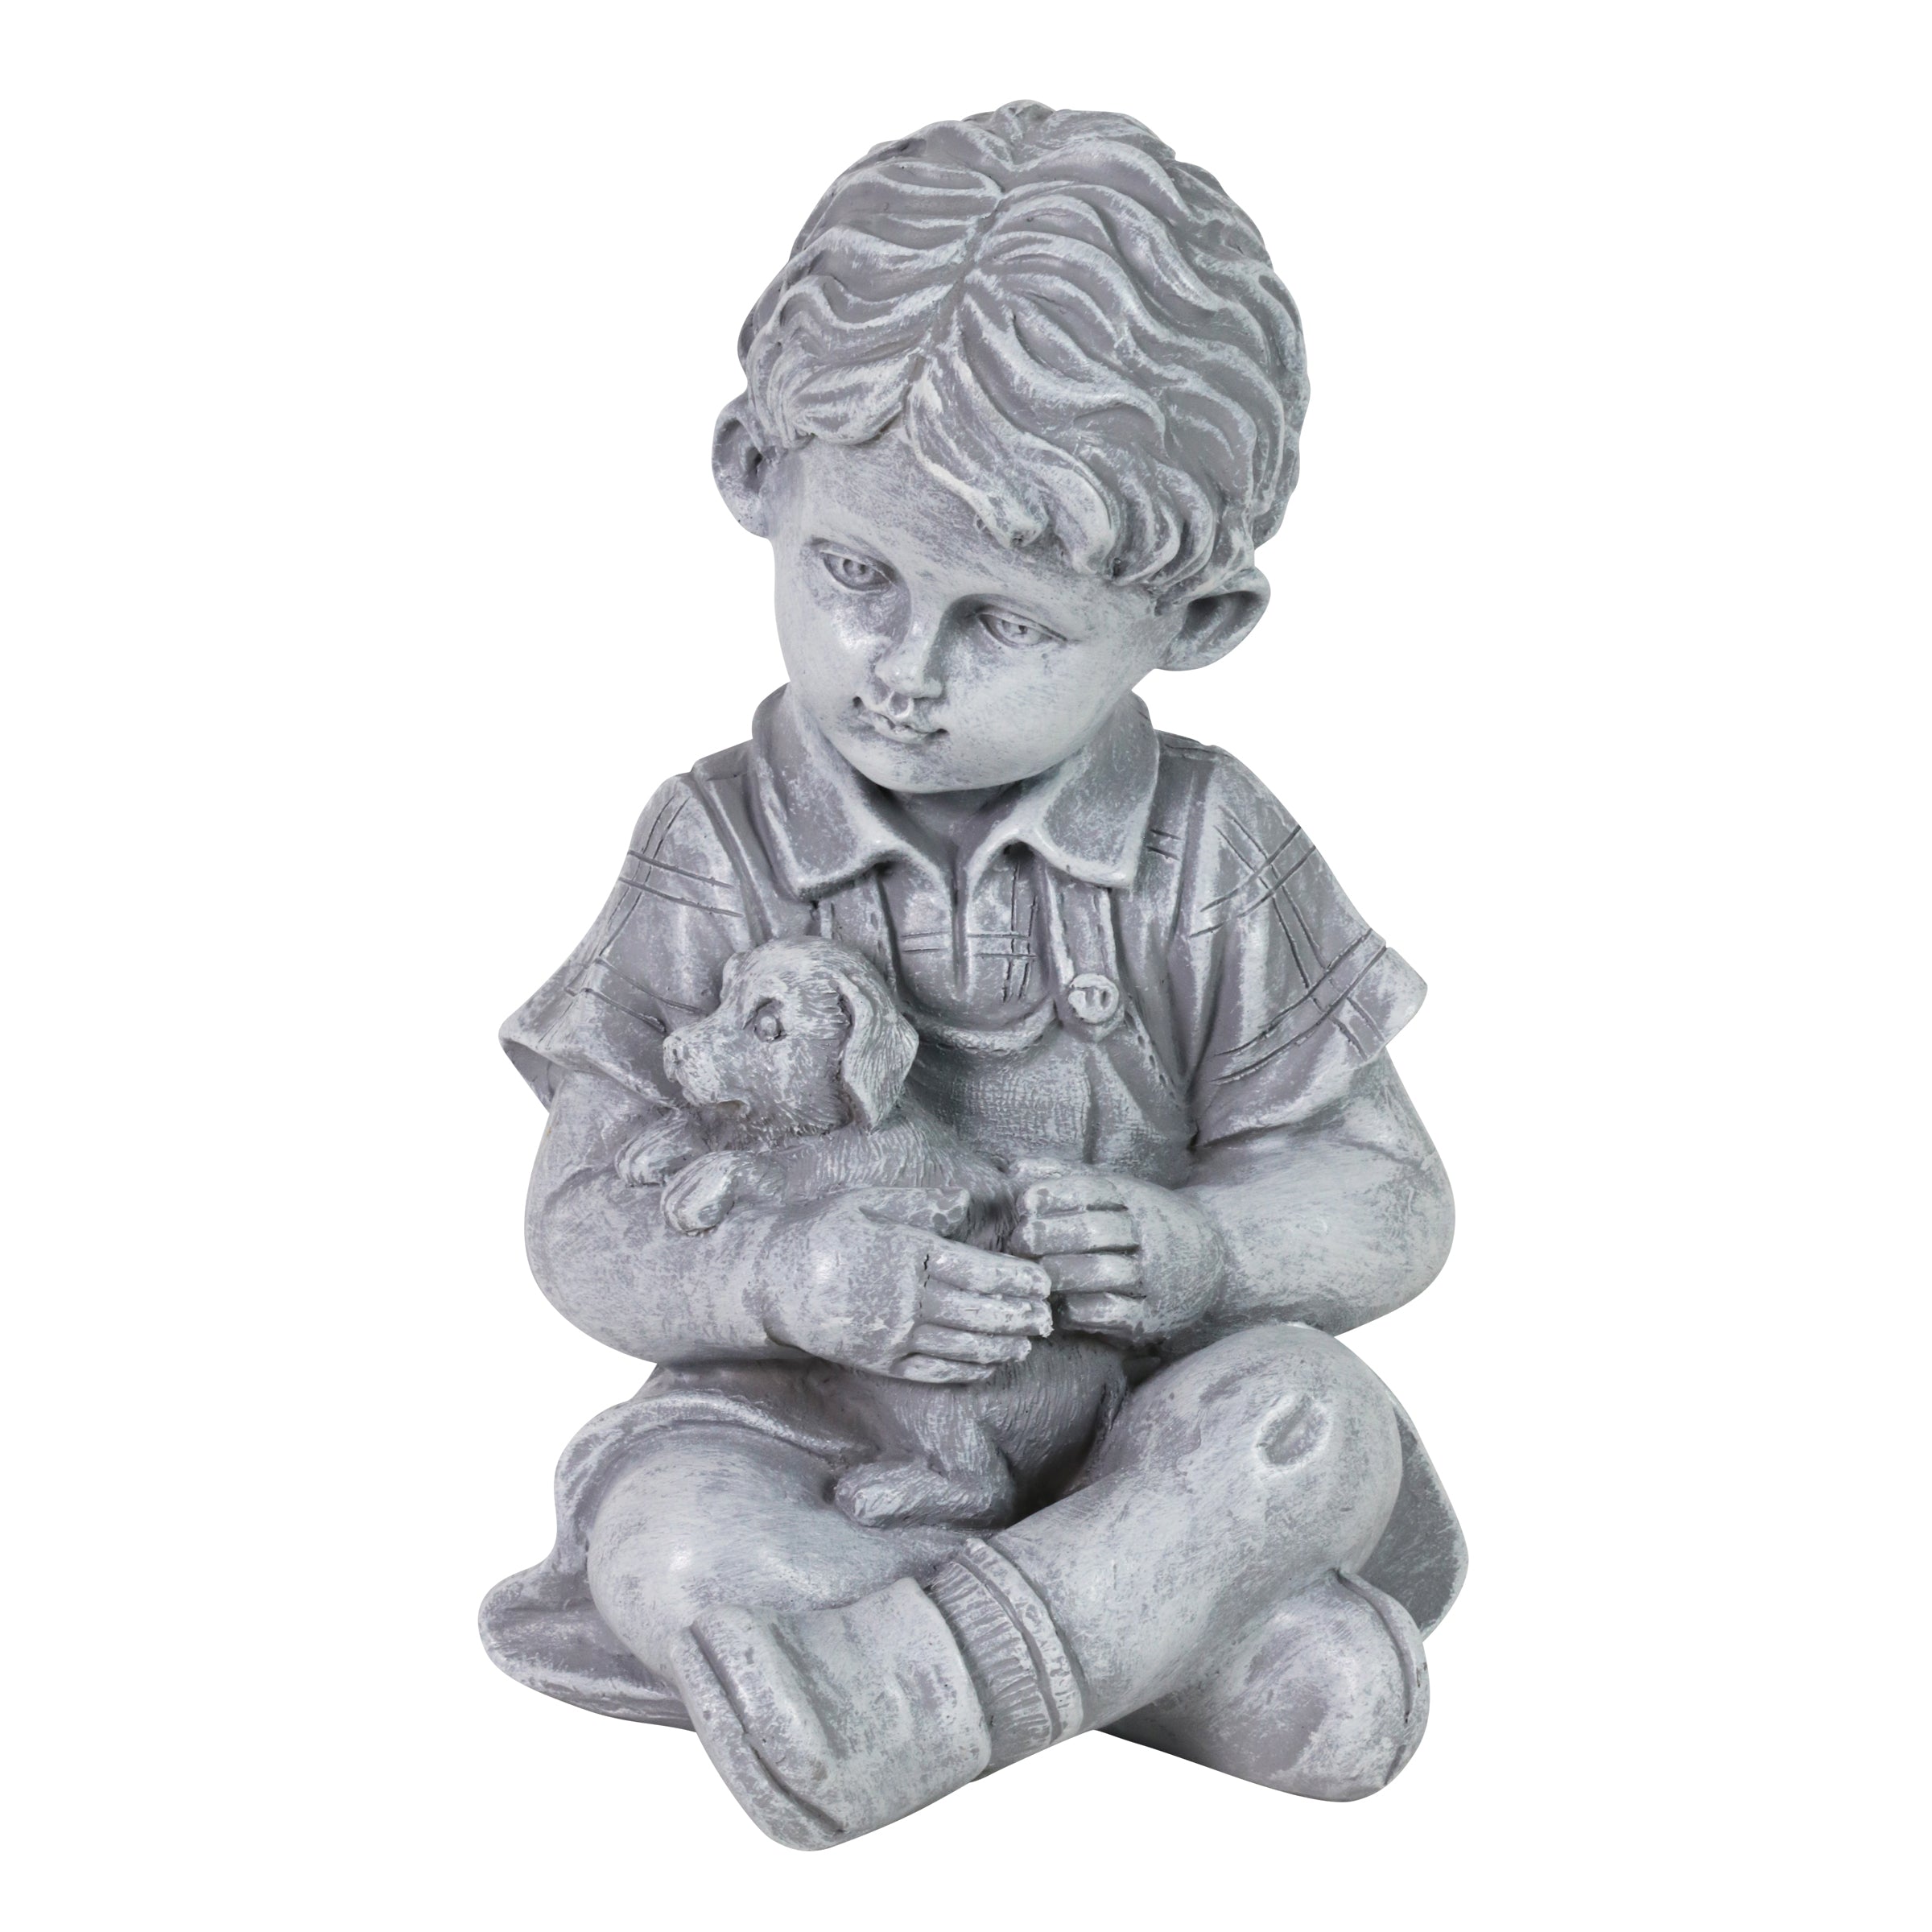 Young Boy with Puppy Resin Garden Statue, 10 Inch